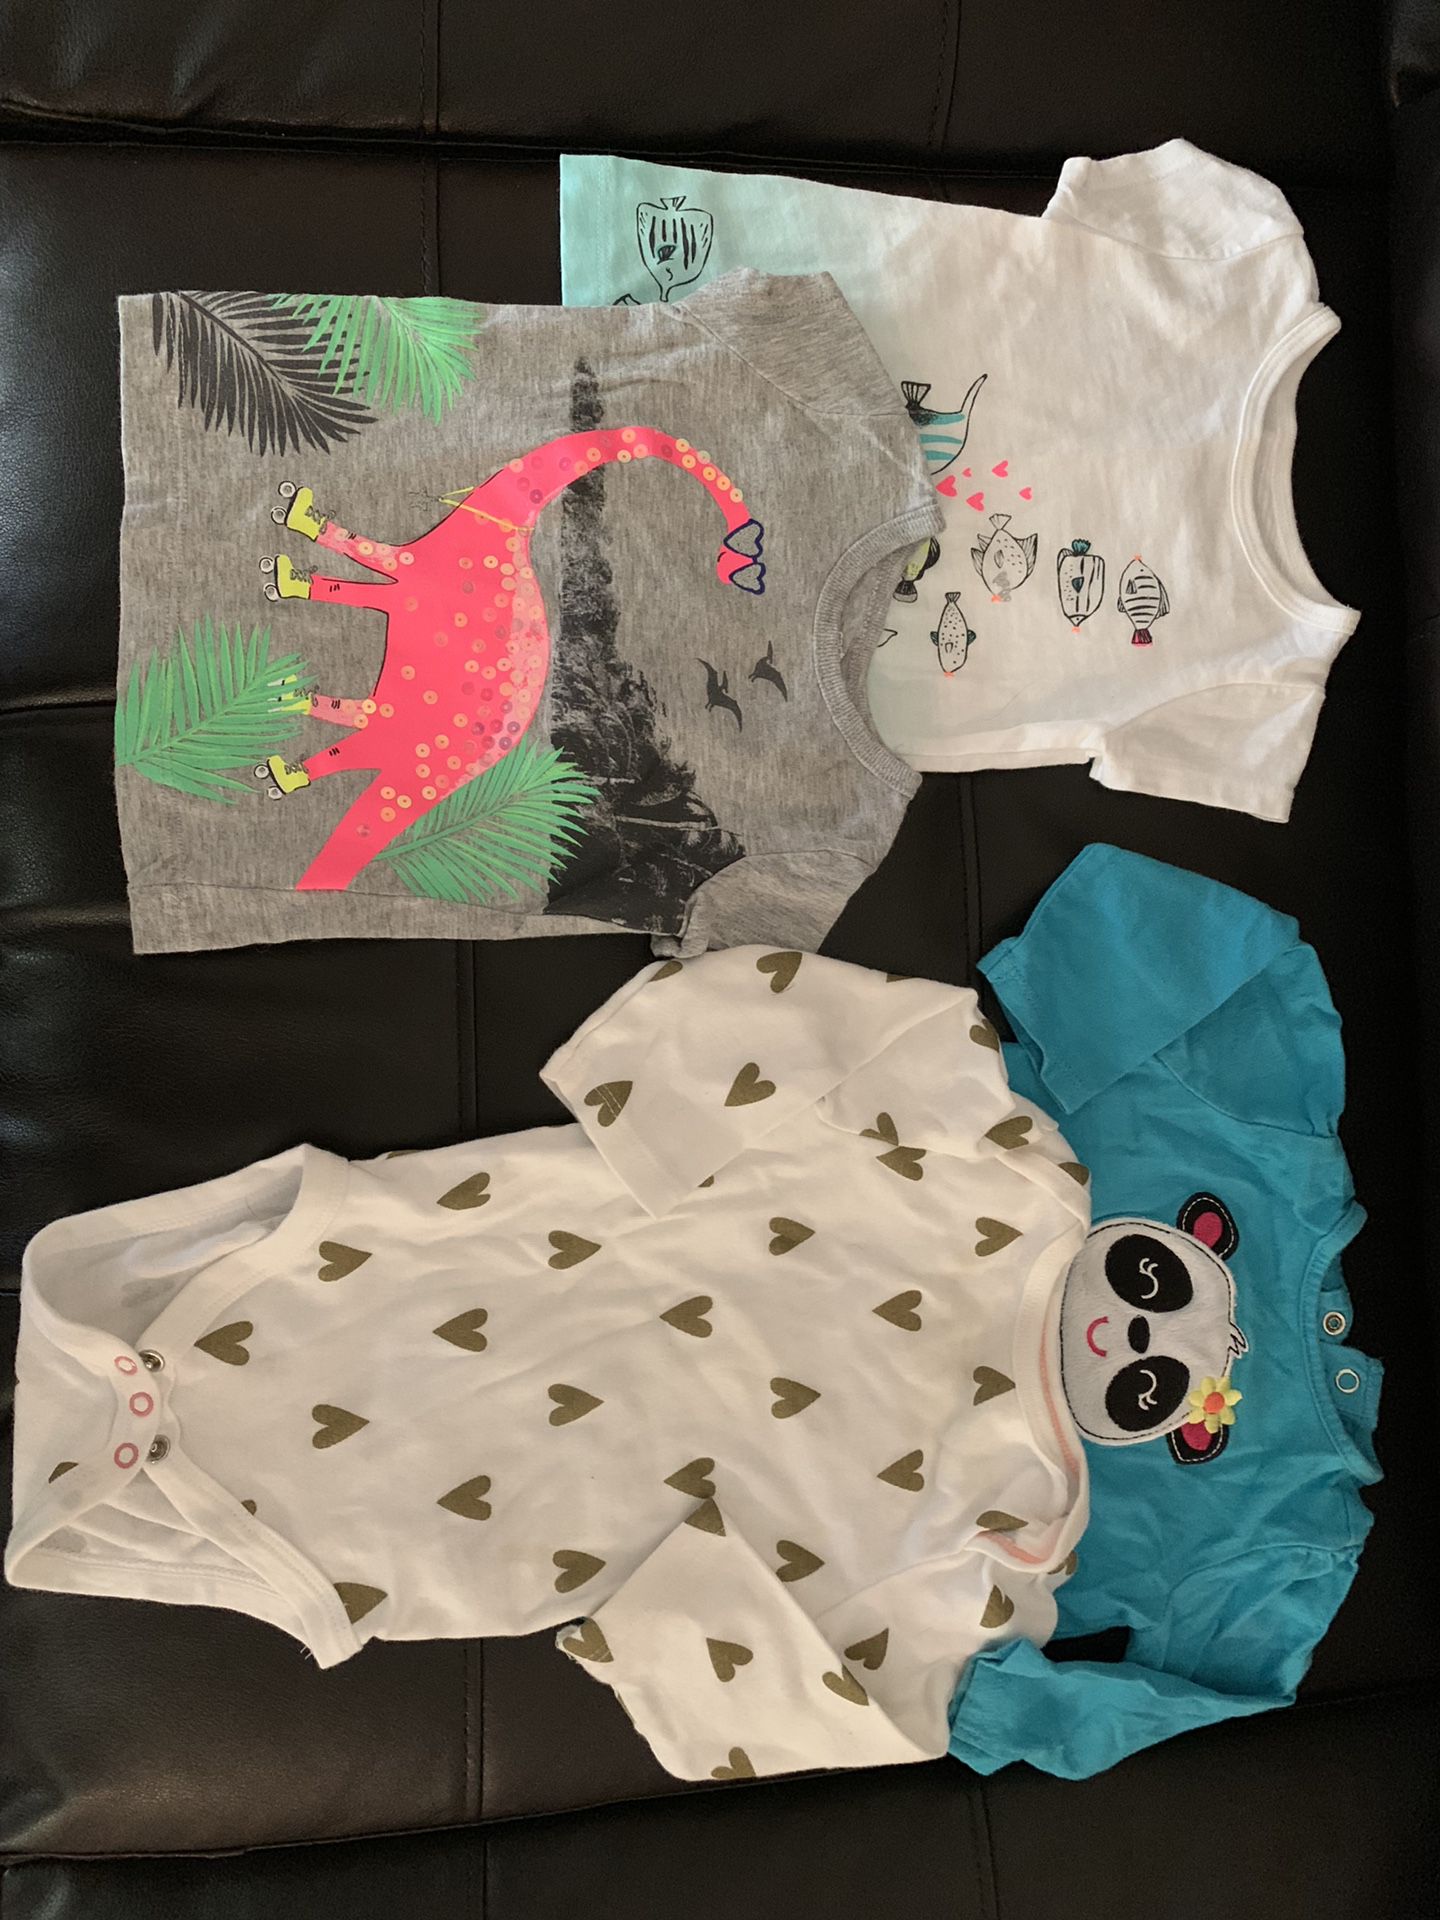 Baby girl clothes. Onesies, sleepers, dresses, and sweaters.